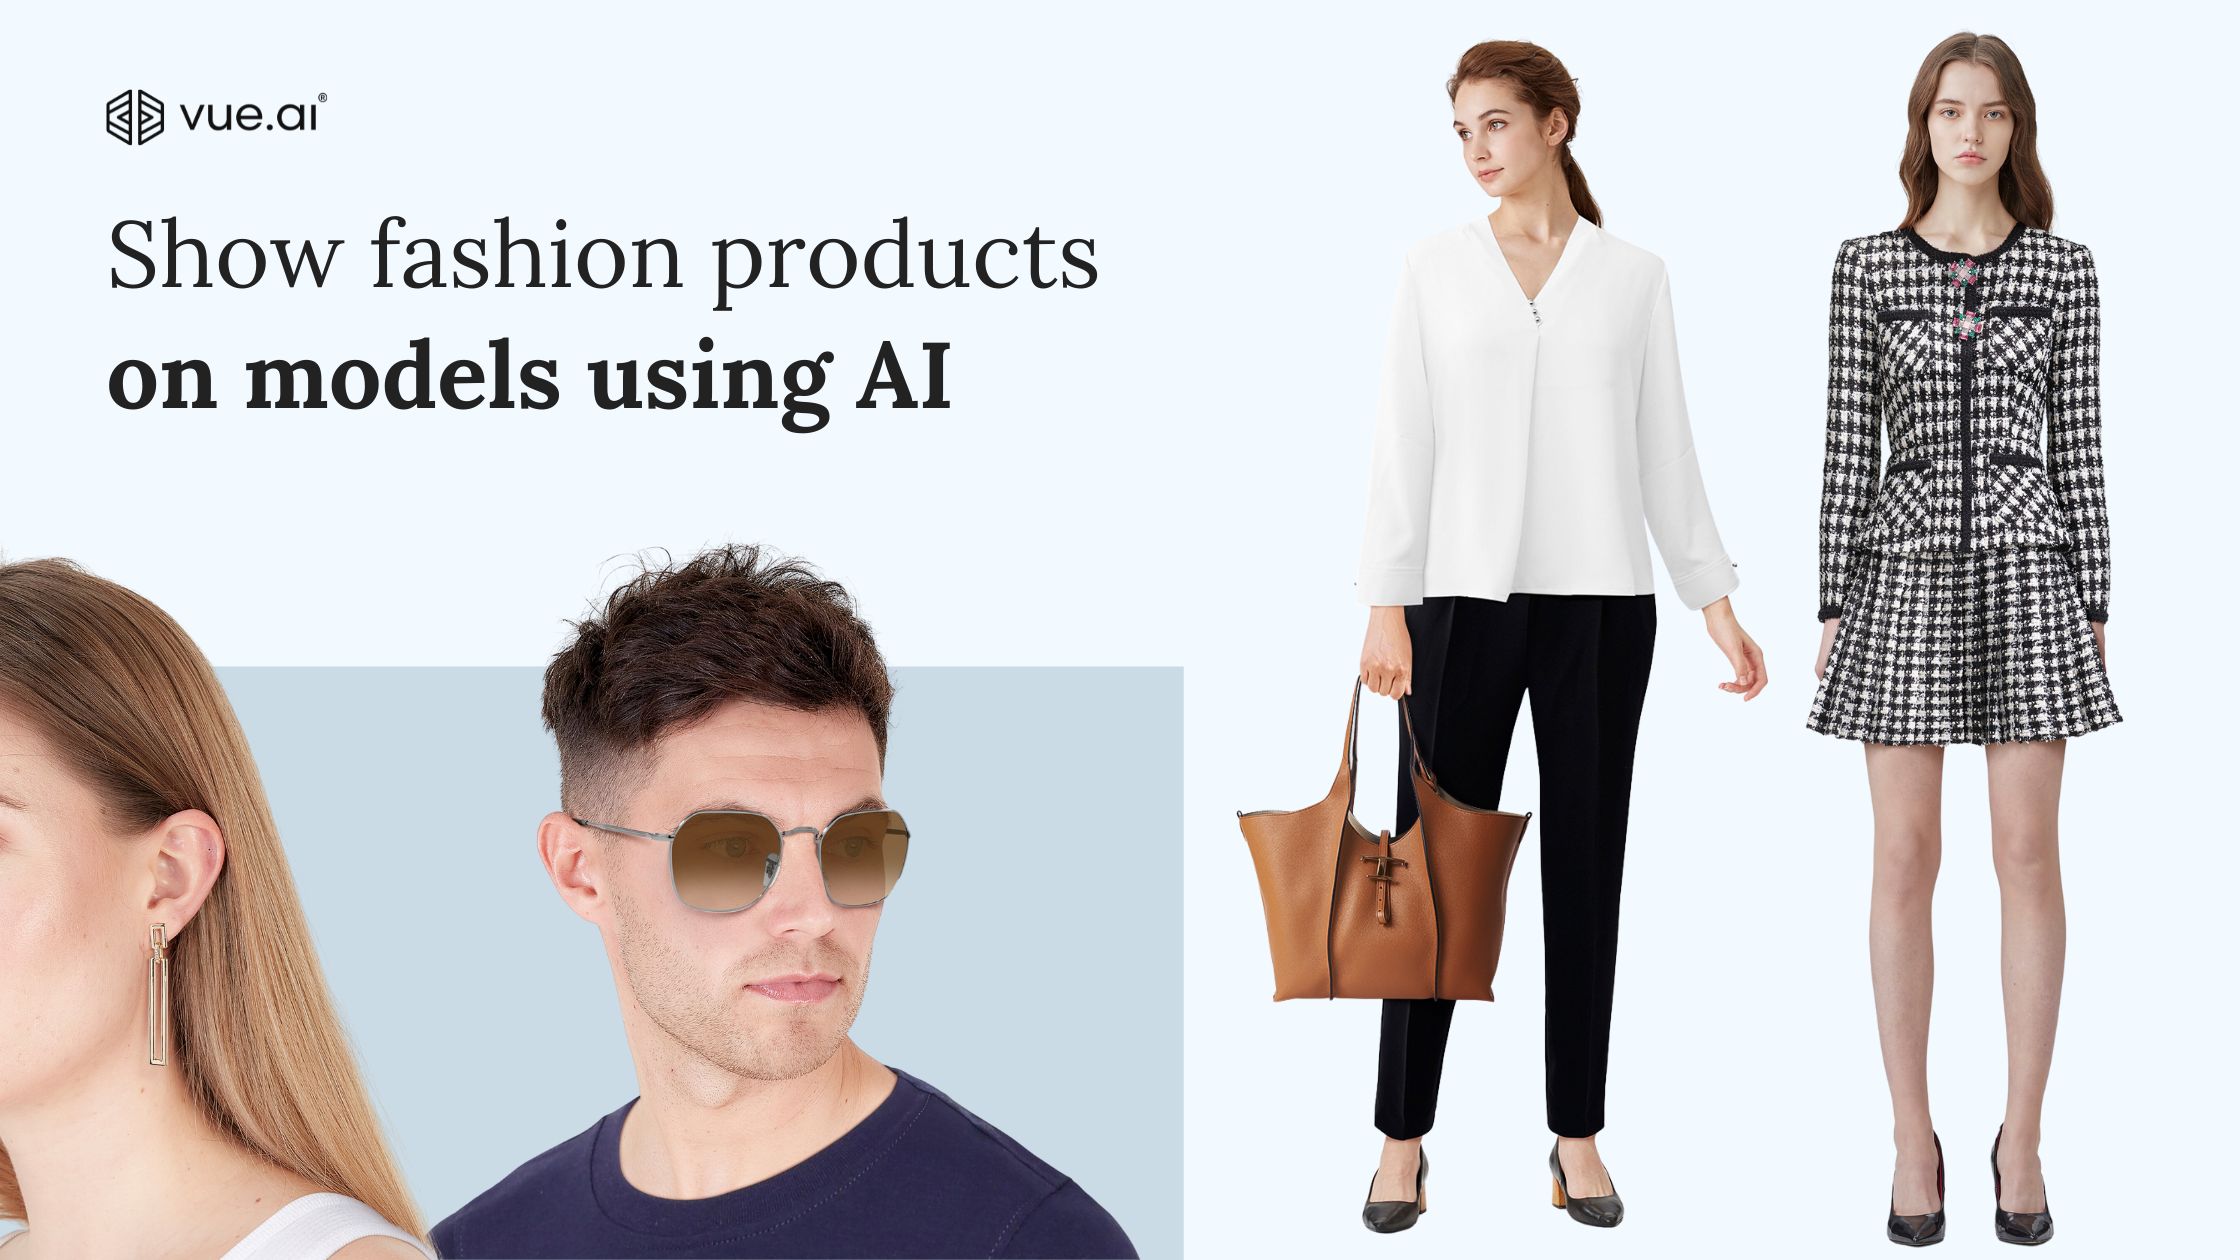 Reduce retail returns with on-model fashion imagery. AI can help lower fashion ecommerce product return rate at 1/4th the cost and 5X the speed.